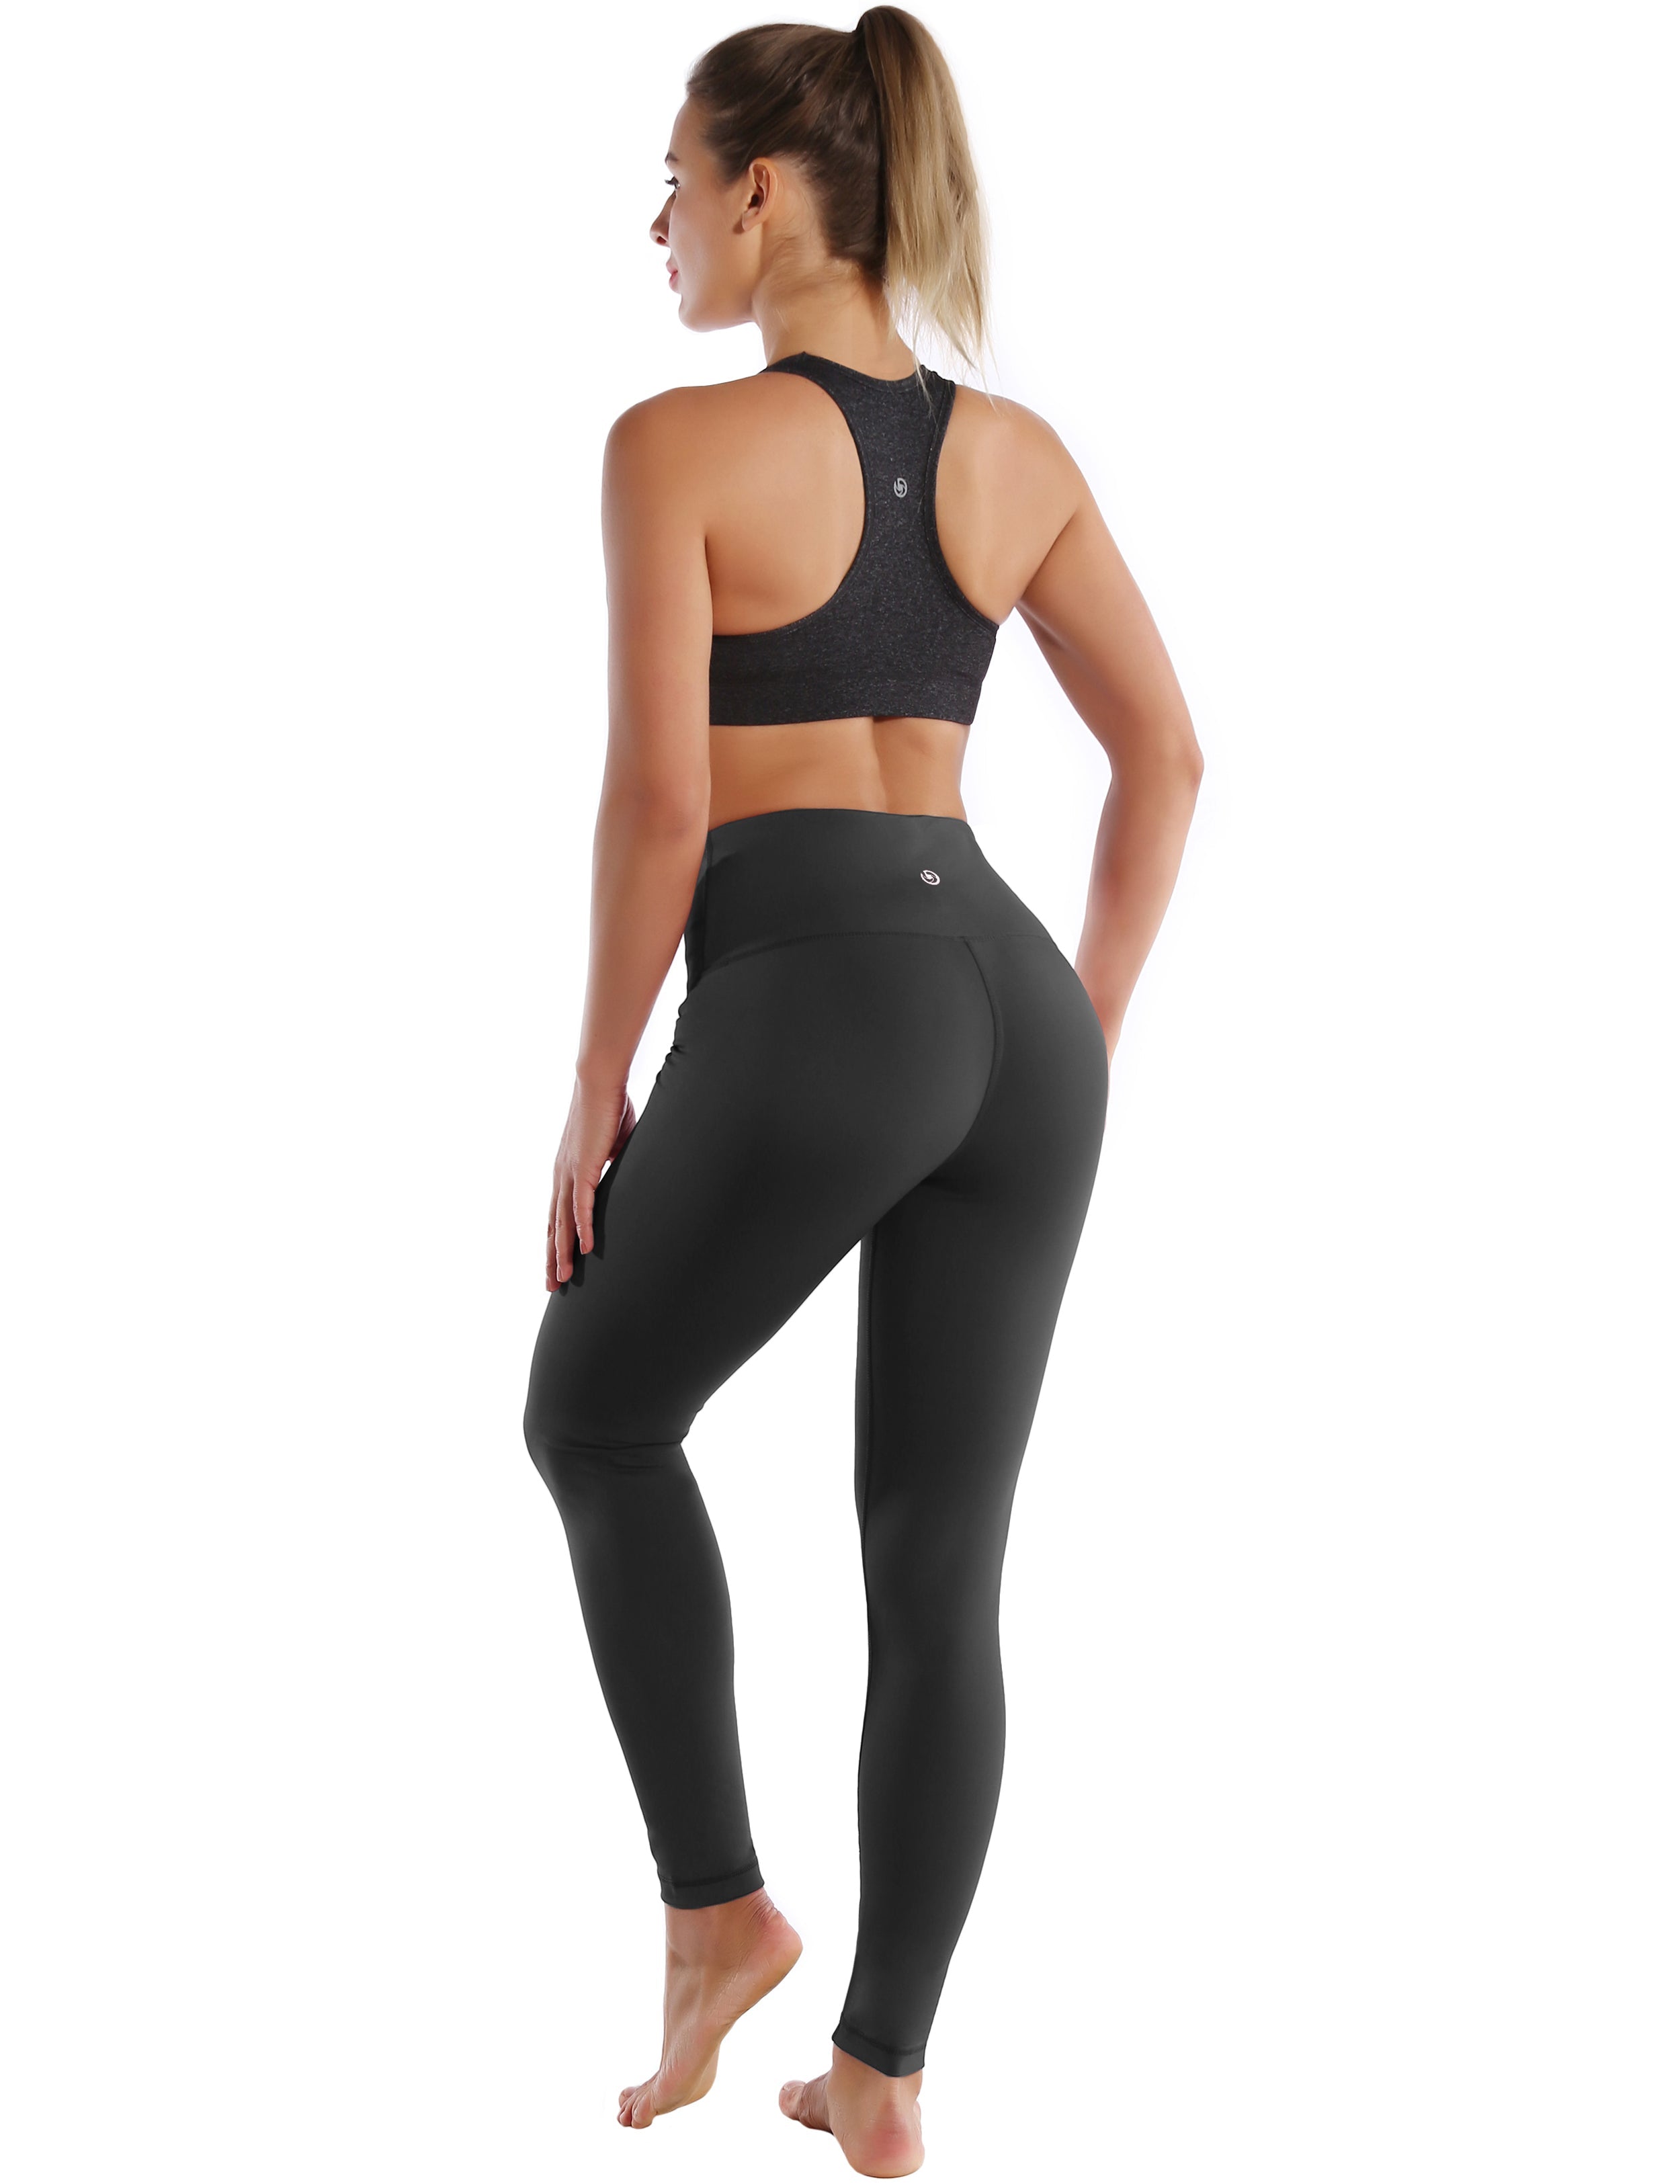 High Waist Jogging Pants shadowcharcoal 75%Nylon/25%Spandex Fabric doesn't attract lint easily 4-way stretch No see-through Moisture-wicking Tummy control Inner pocket Four lengths